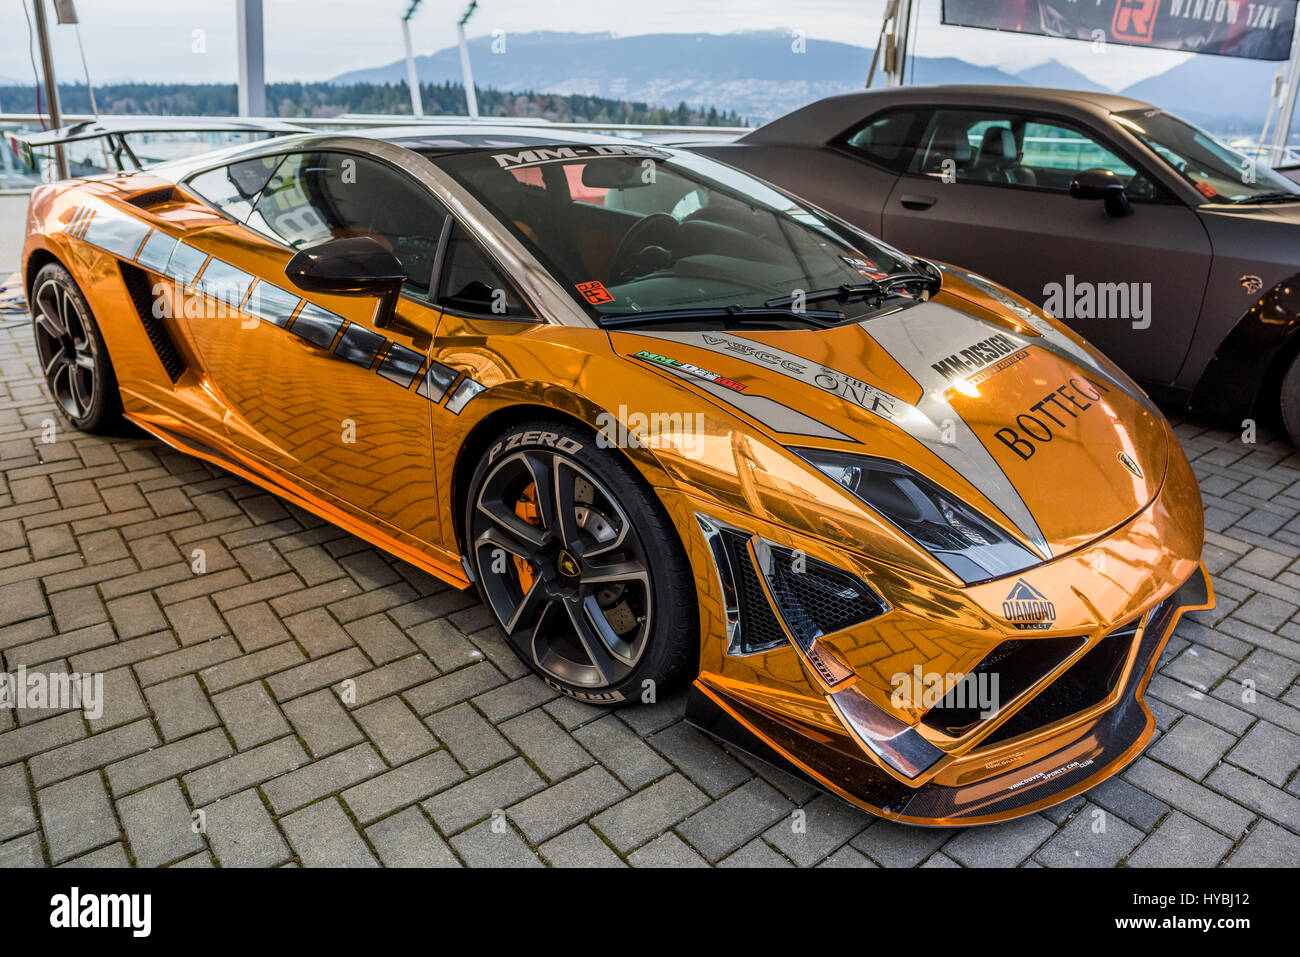 Gold sports car outside Vancouver Auto Show, Vancouver, British Columbia, Canada. Stock Photo